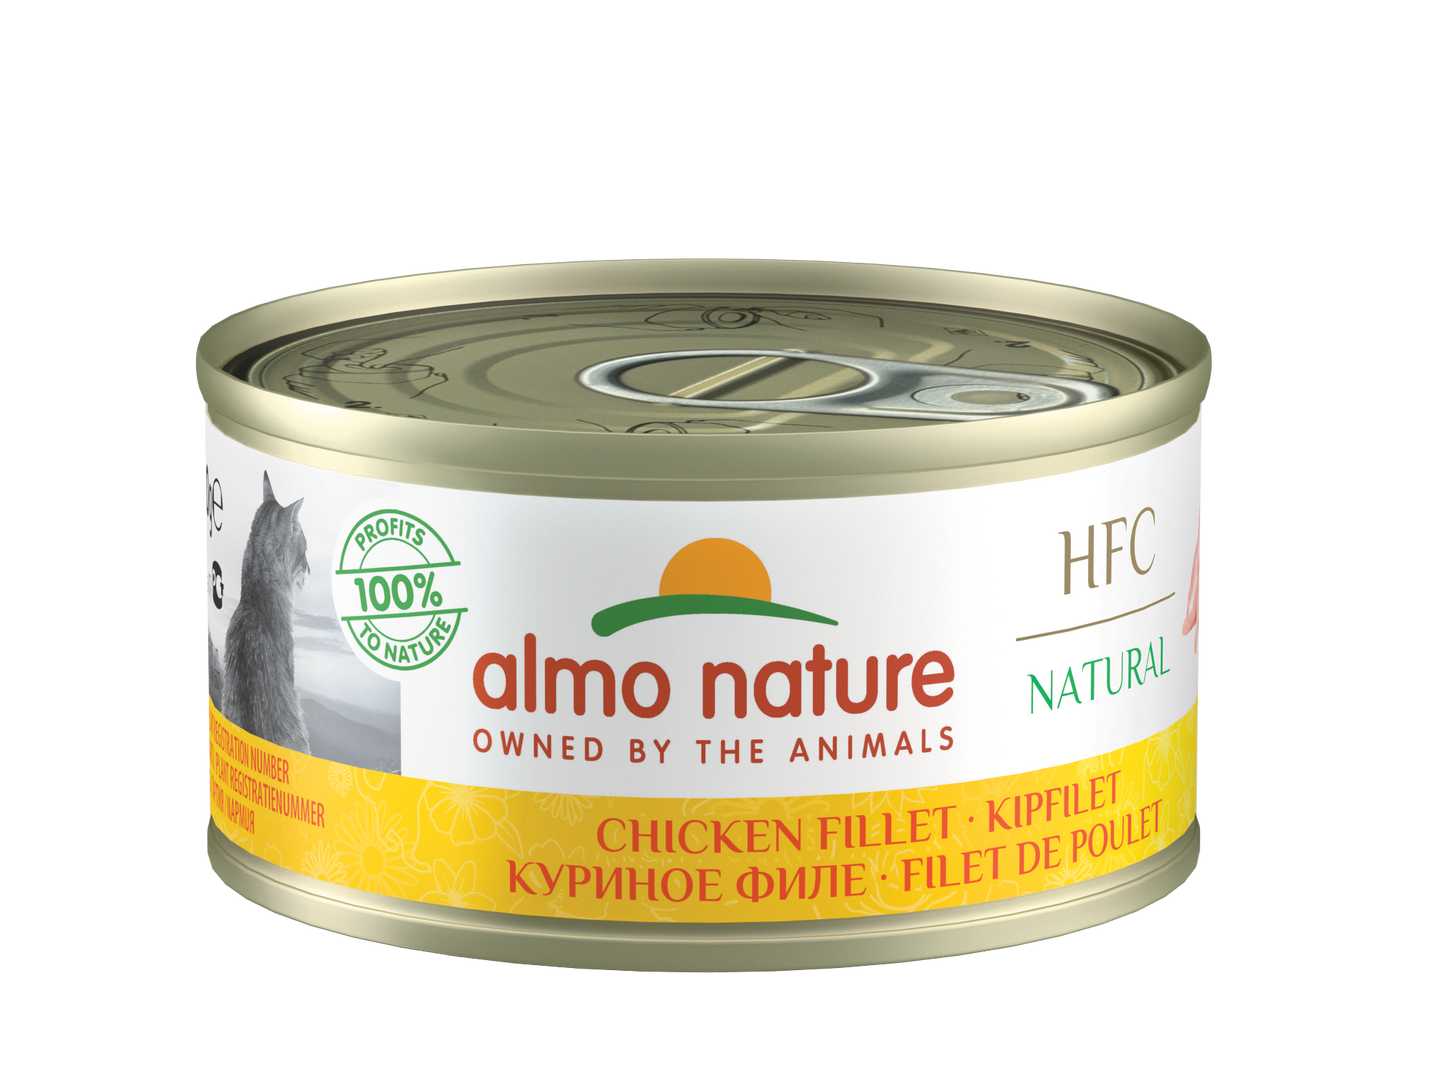 Almo Nature HFC Natural Canned Cat Food – Chicken Fillet, 70g